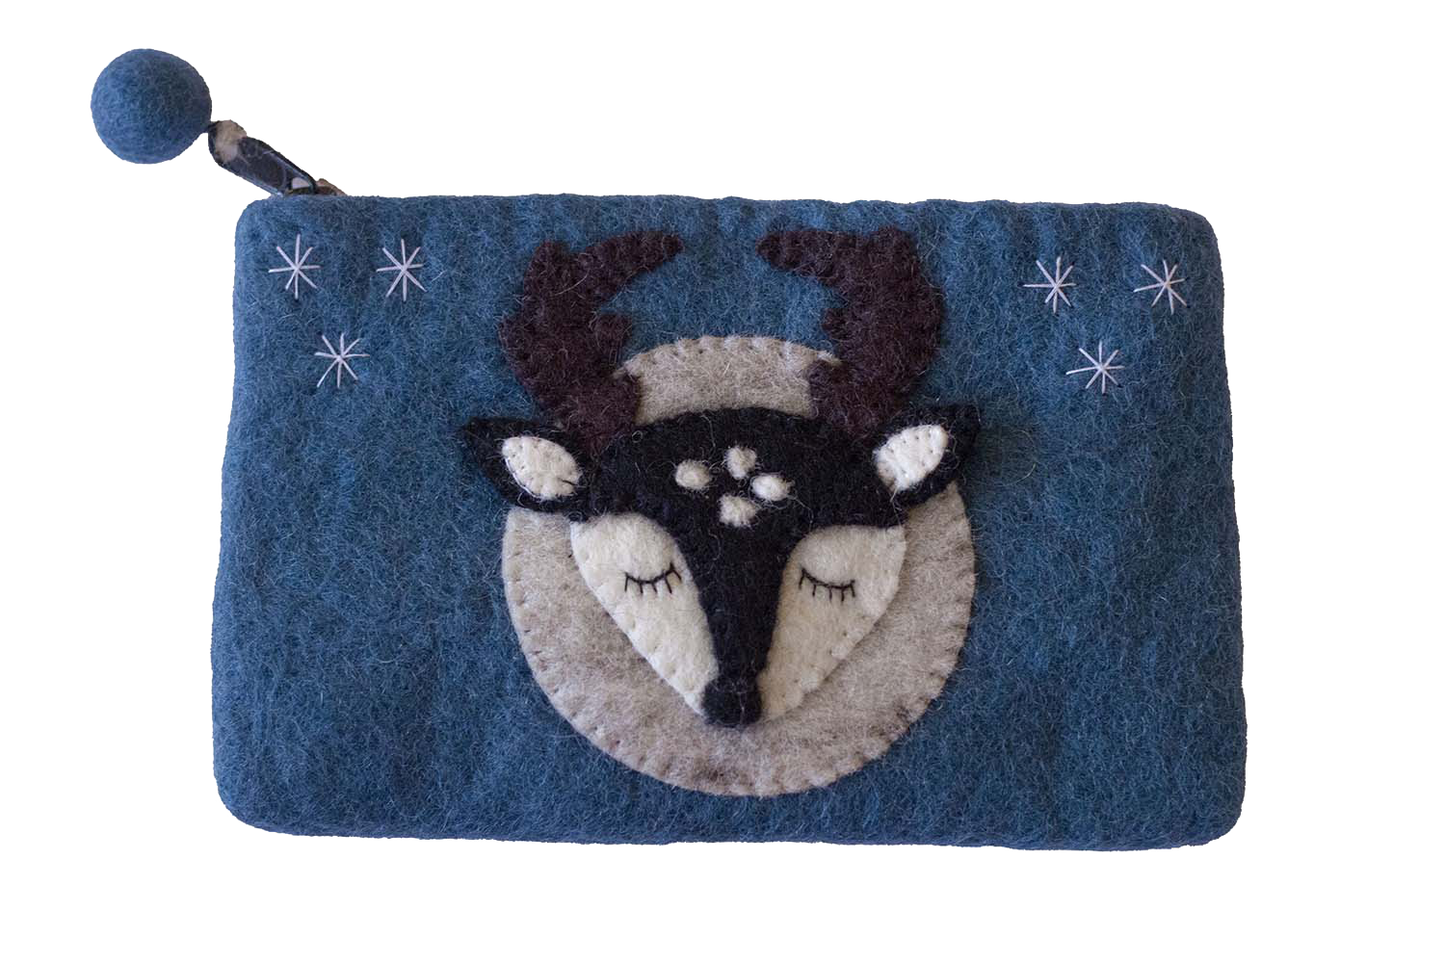 This Global Groove Life, handmade, ethical, fair trade, eco-friendly, sustainable, blue felt zipper coin pouch was created by artisans in Kathmandu Nepal and is adorned with an adorable stag with moon and stars motif.